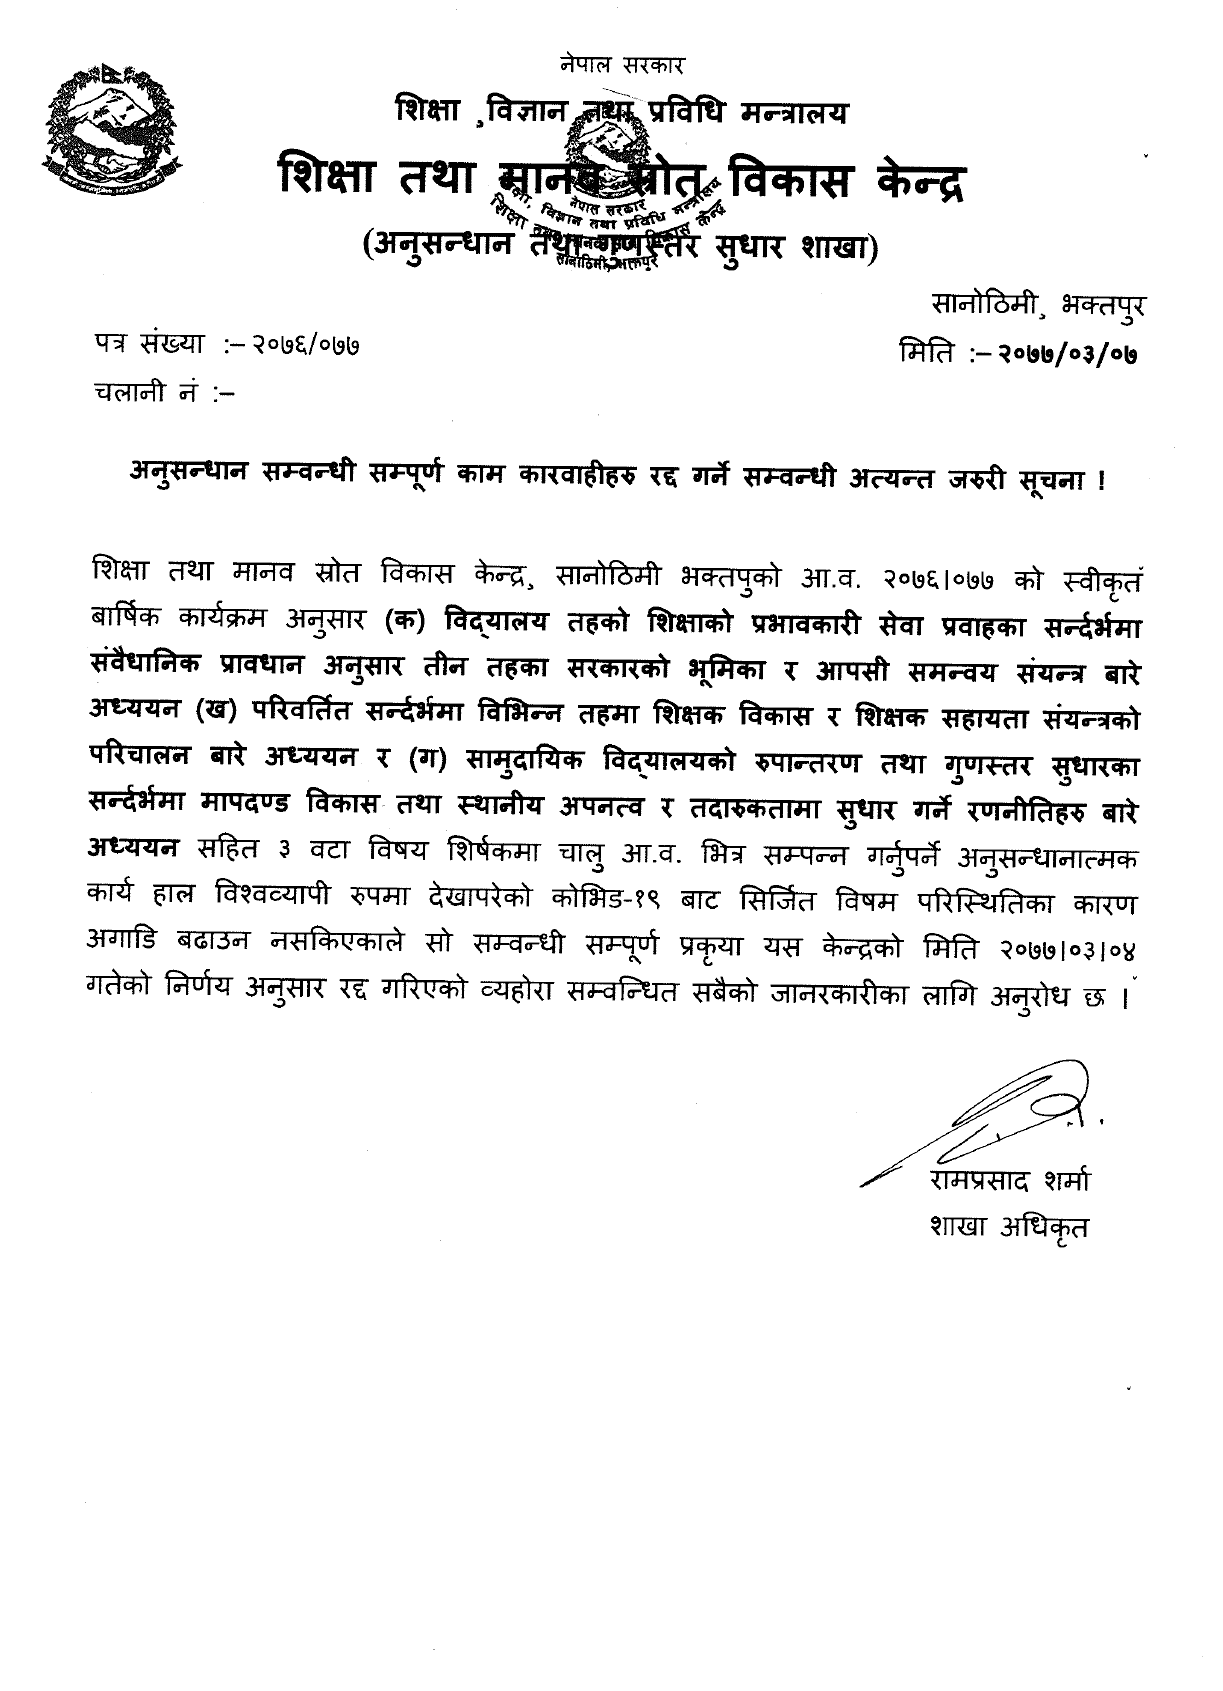 MOEST Urgent notice regarding cancellation of all work related to the investigation